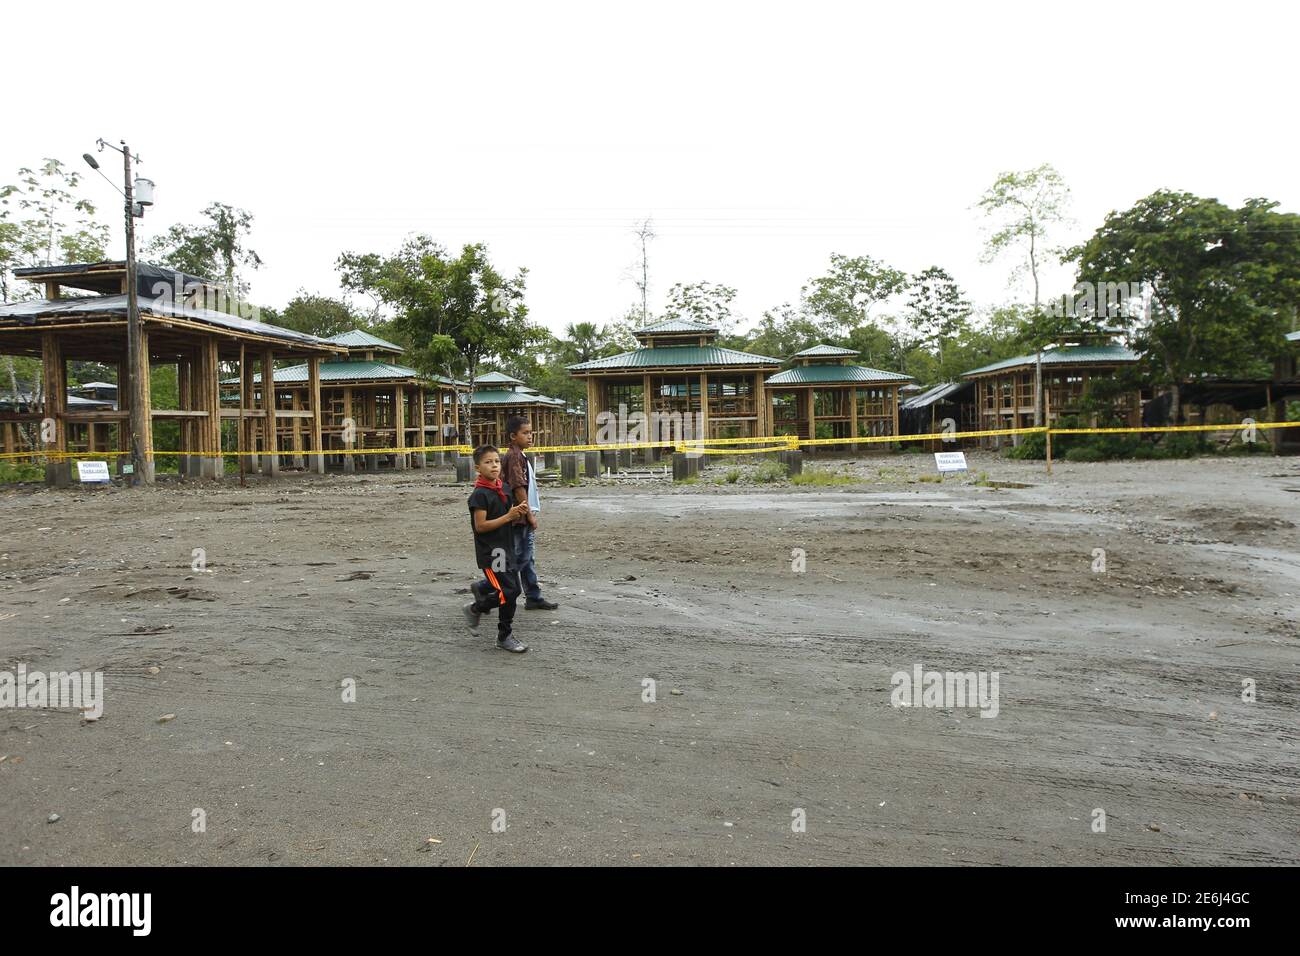 Boys of the Cofan indigenous people walk near new houses constructed by the government administration in the Quichua community at Dureno, Ecuador, March 26, 2016. REUTERS/Guillermo Granja Stock Photo